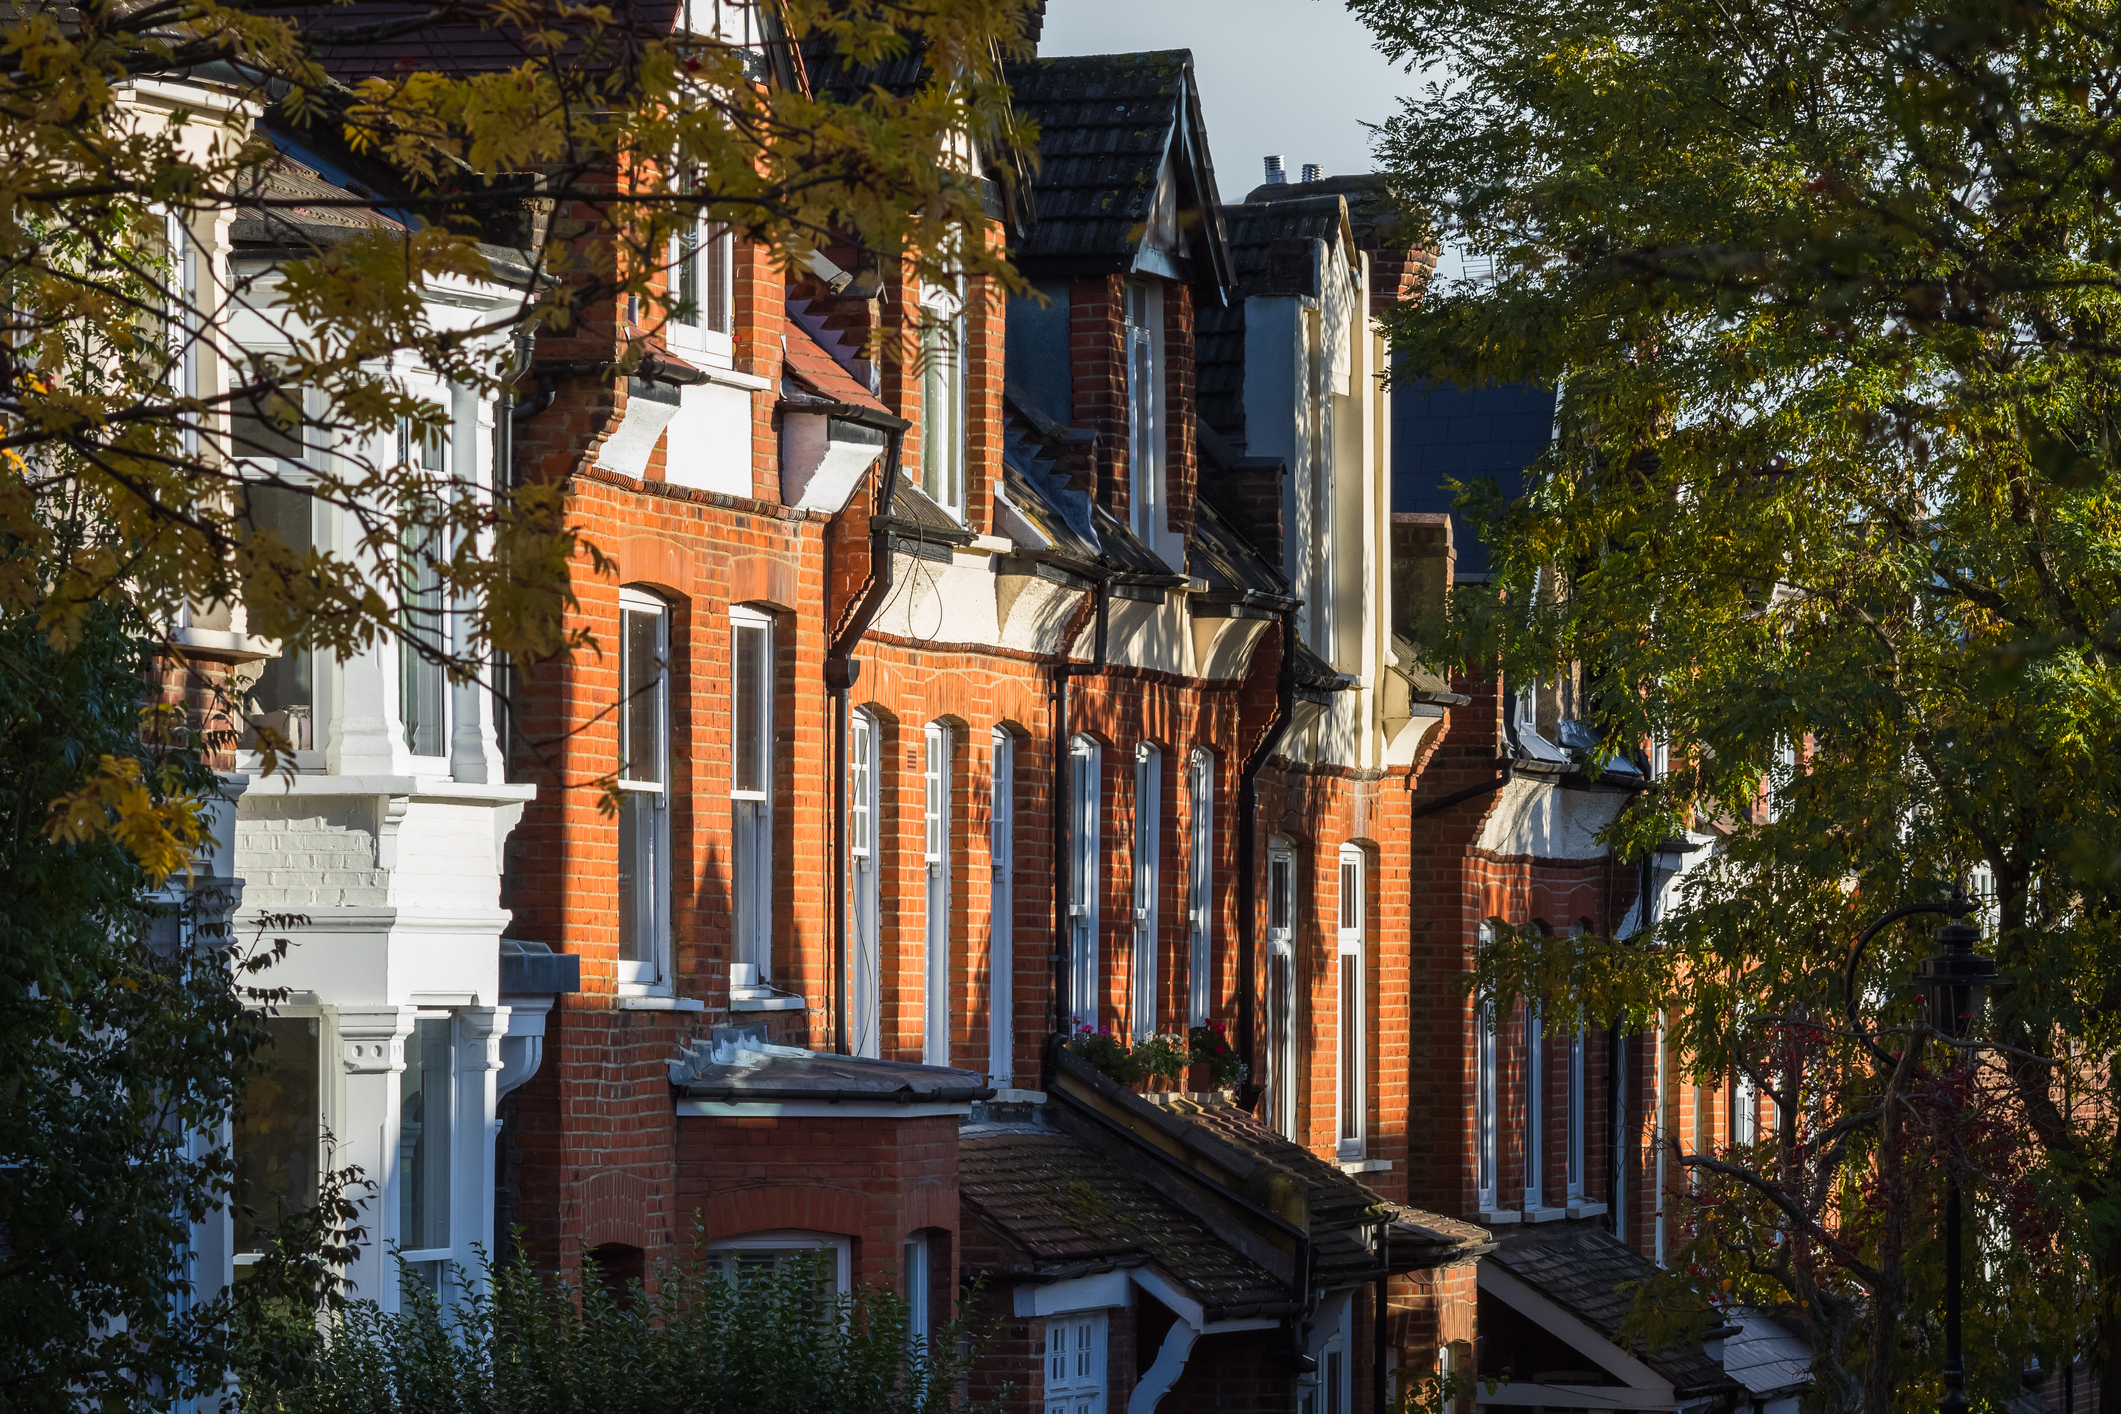 Facade of traditional English terraced houses partially in the shade of trees in Crouch End of London